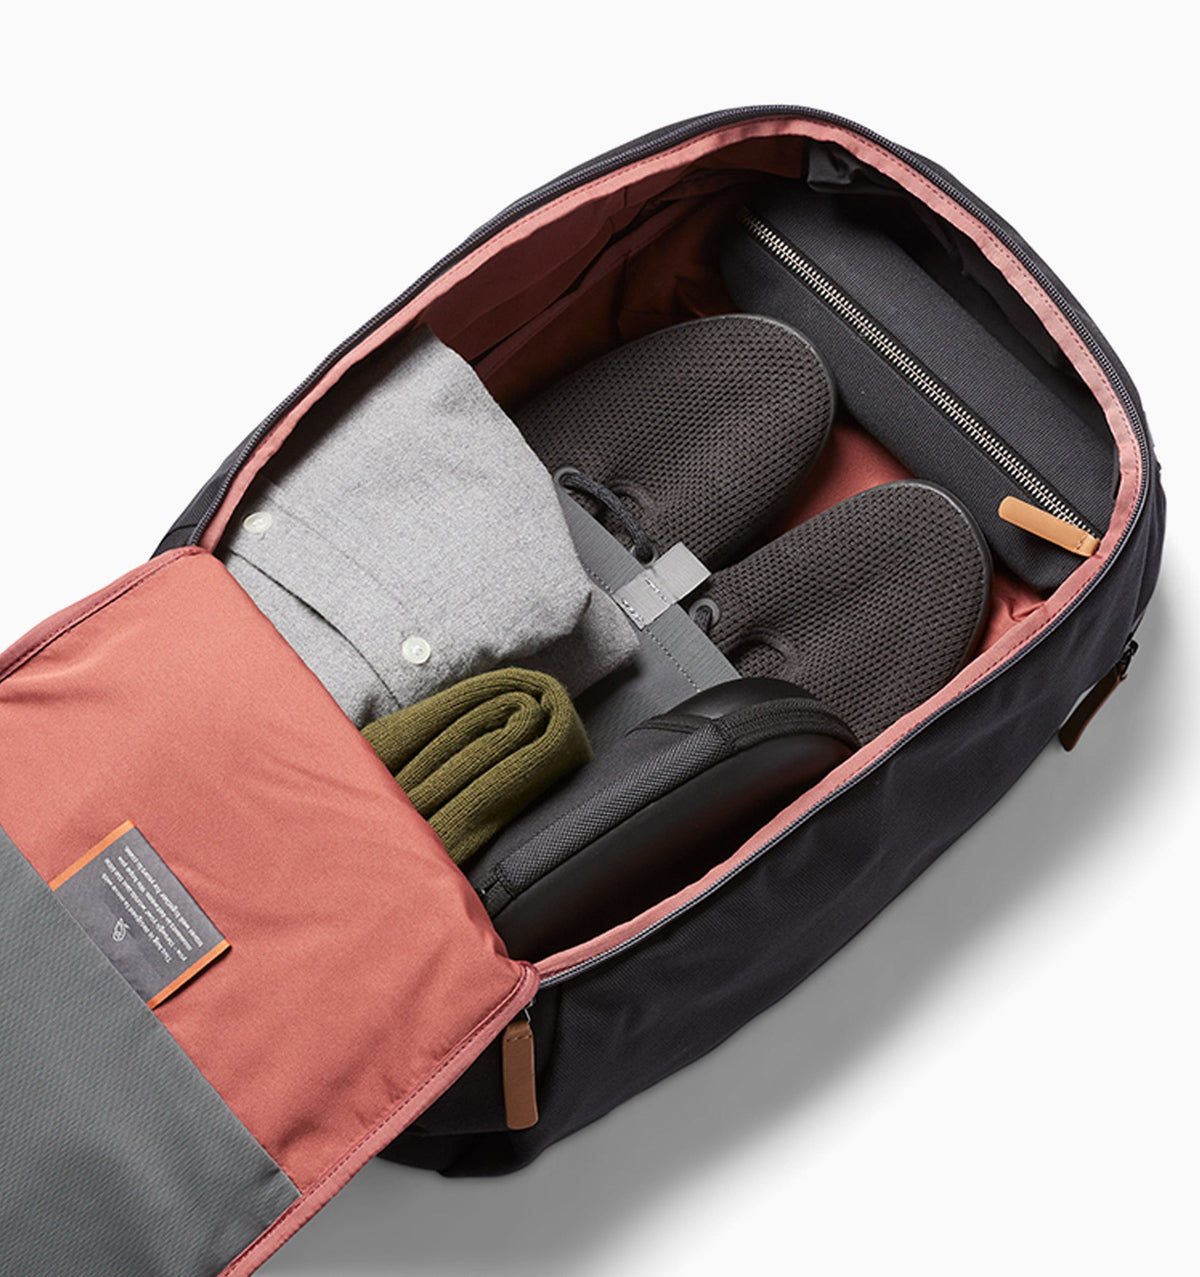 Bellroy Transit Workpack - Charcoal